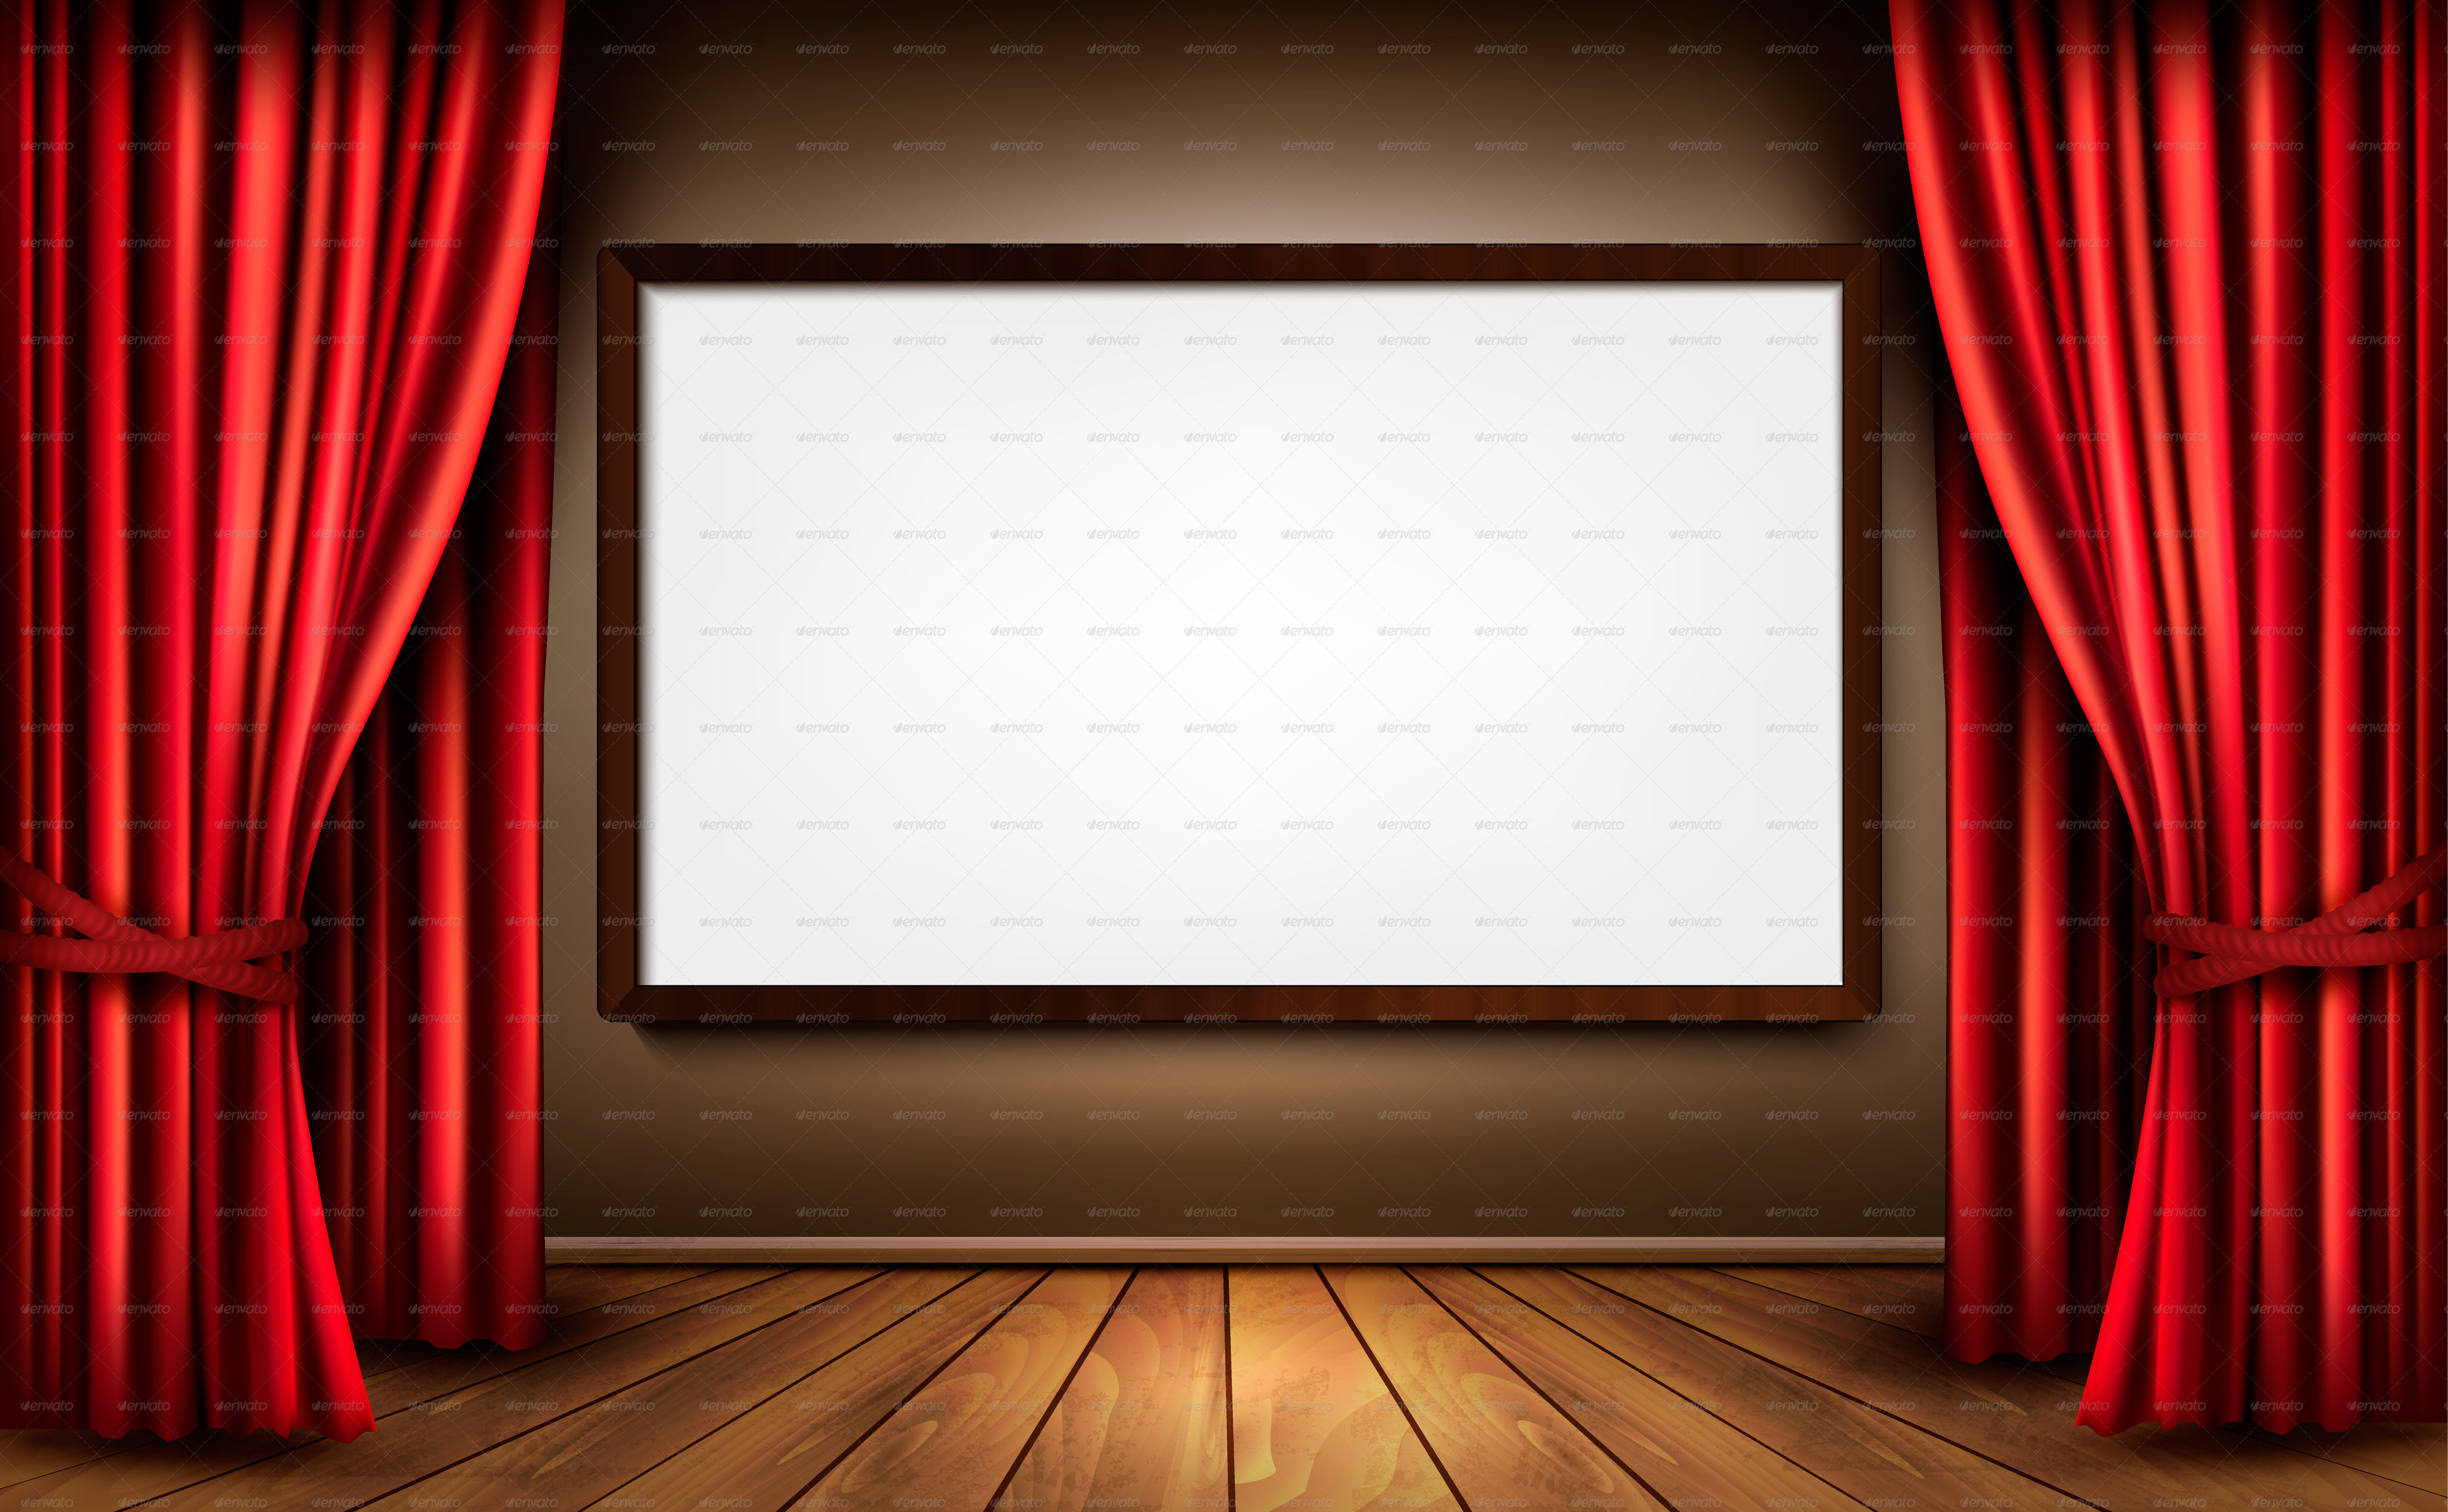 Background With Red Velvet Curtain And A Screen   Graphicriver